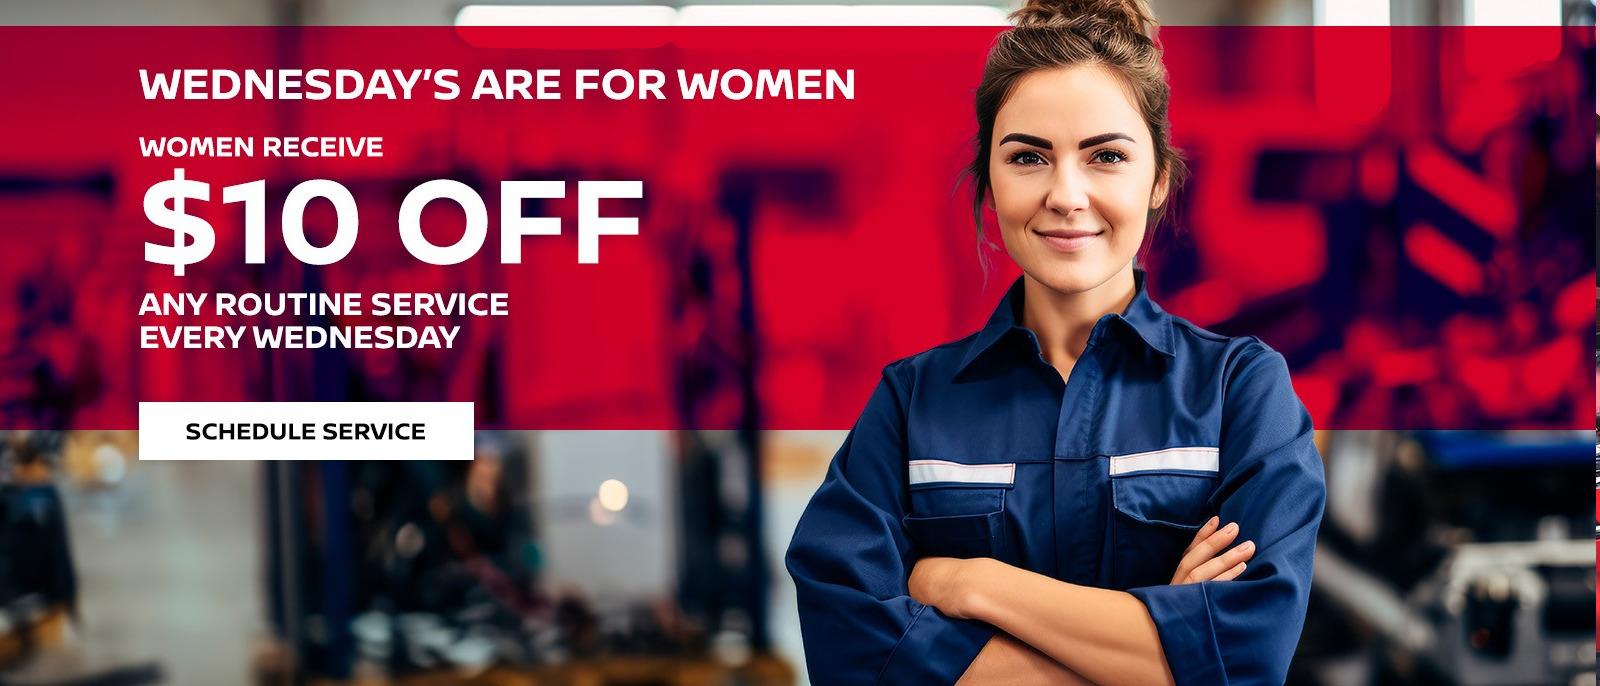 Wednesday's Are For Women at Nissan of Gadsden